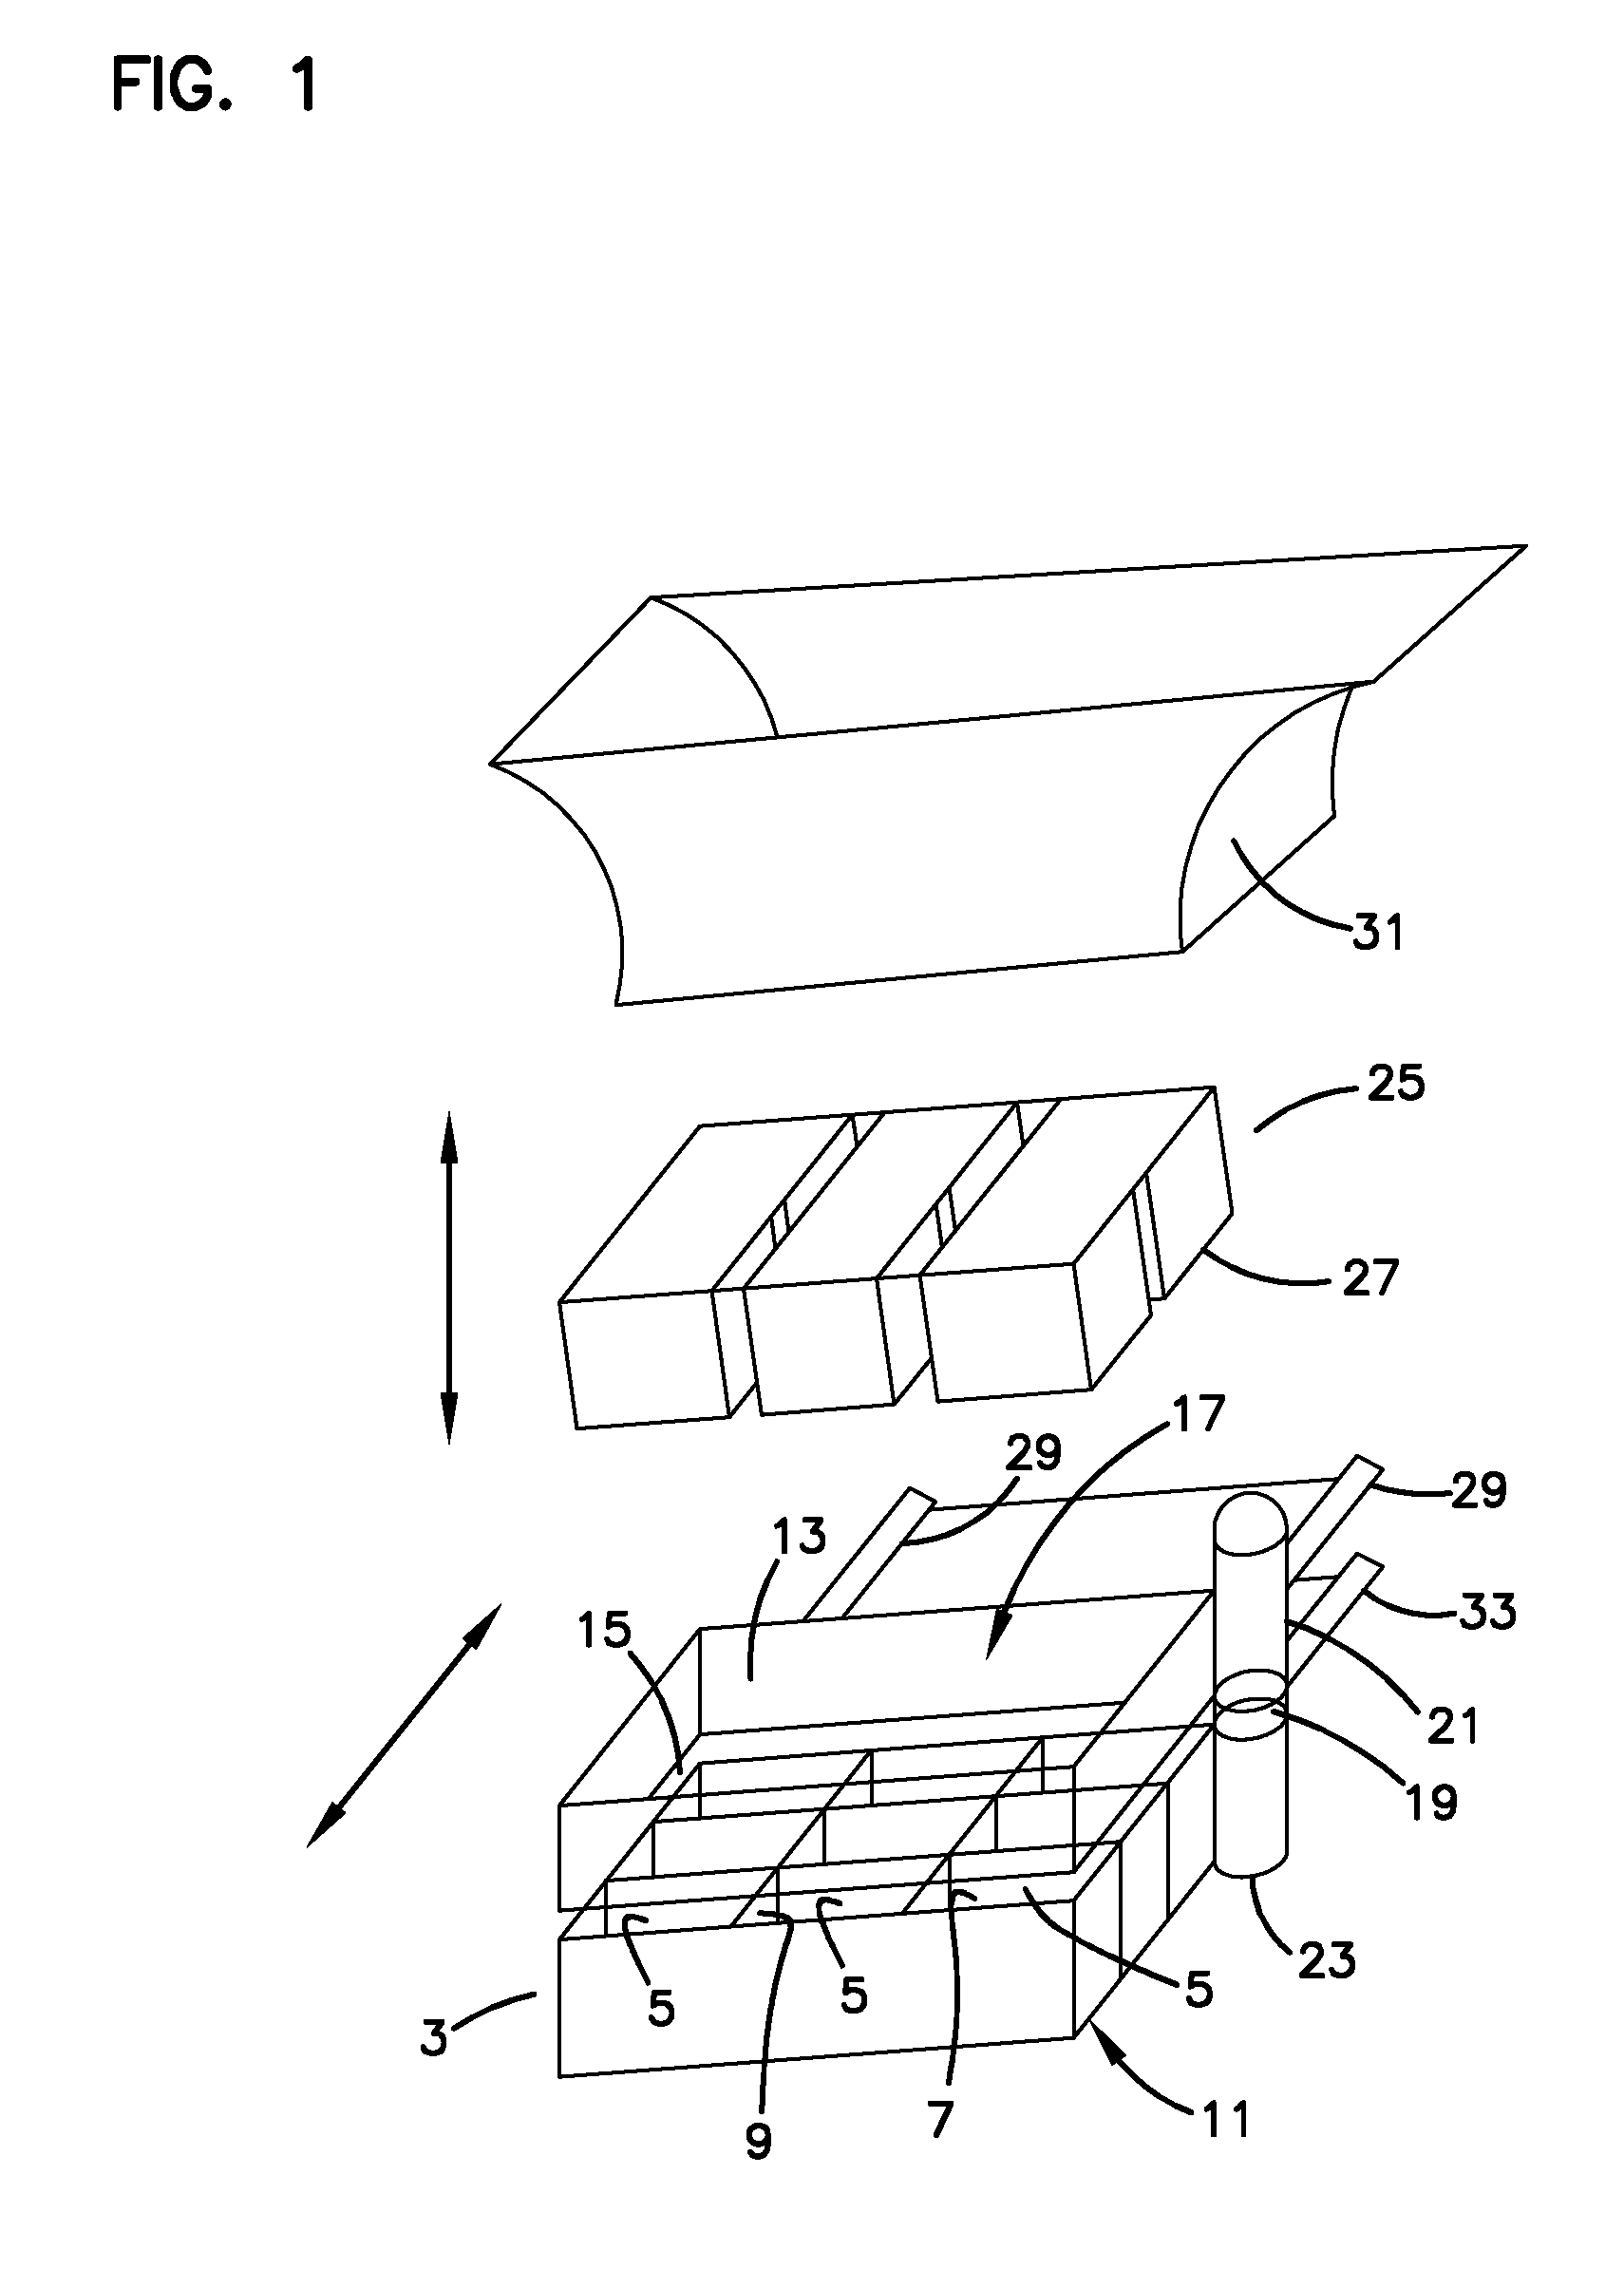 Pressed, self-solidifying, solid cleaning compositions and methods of making them